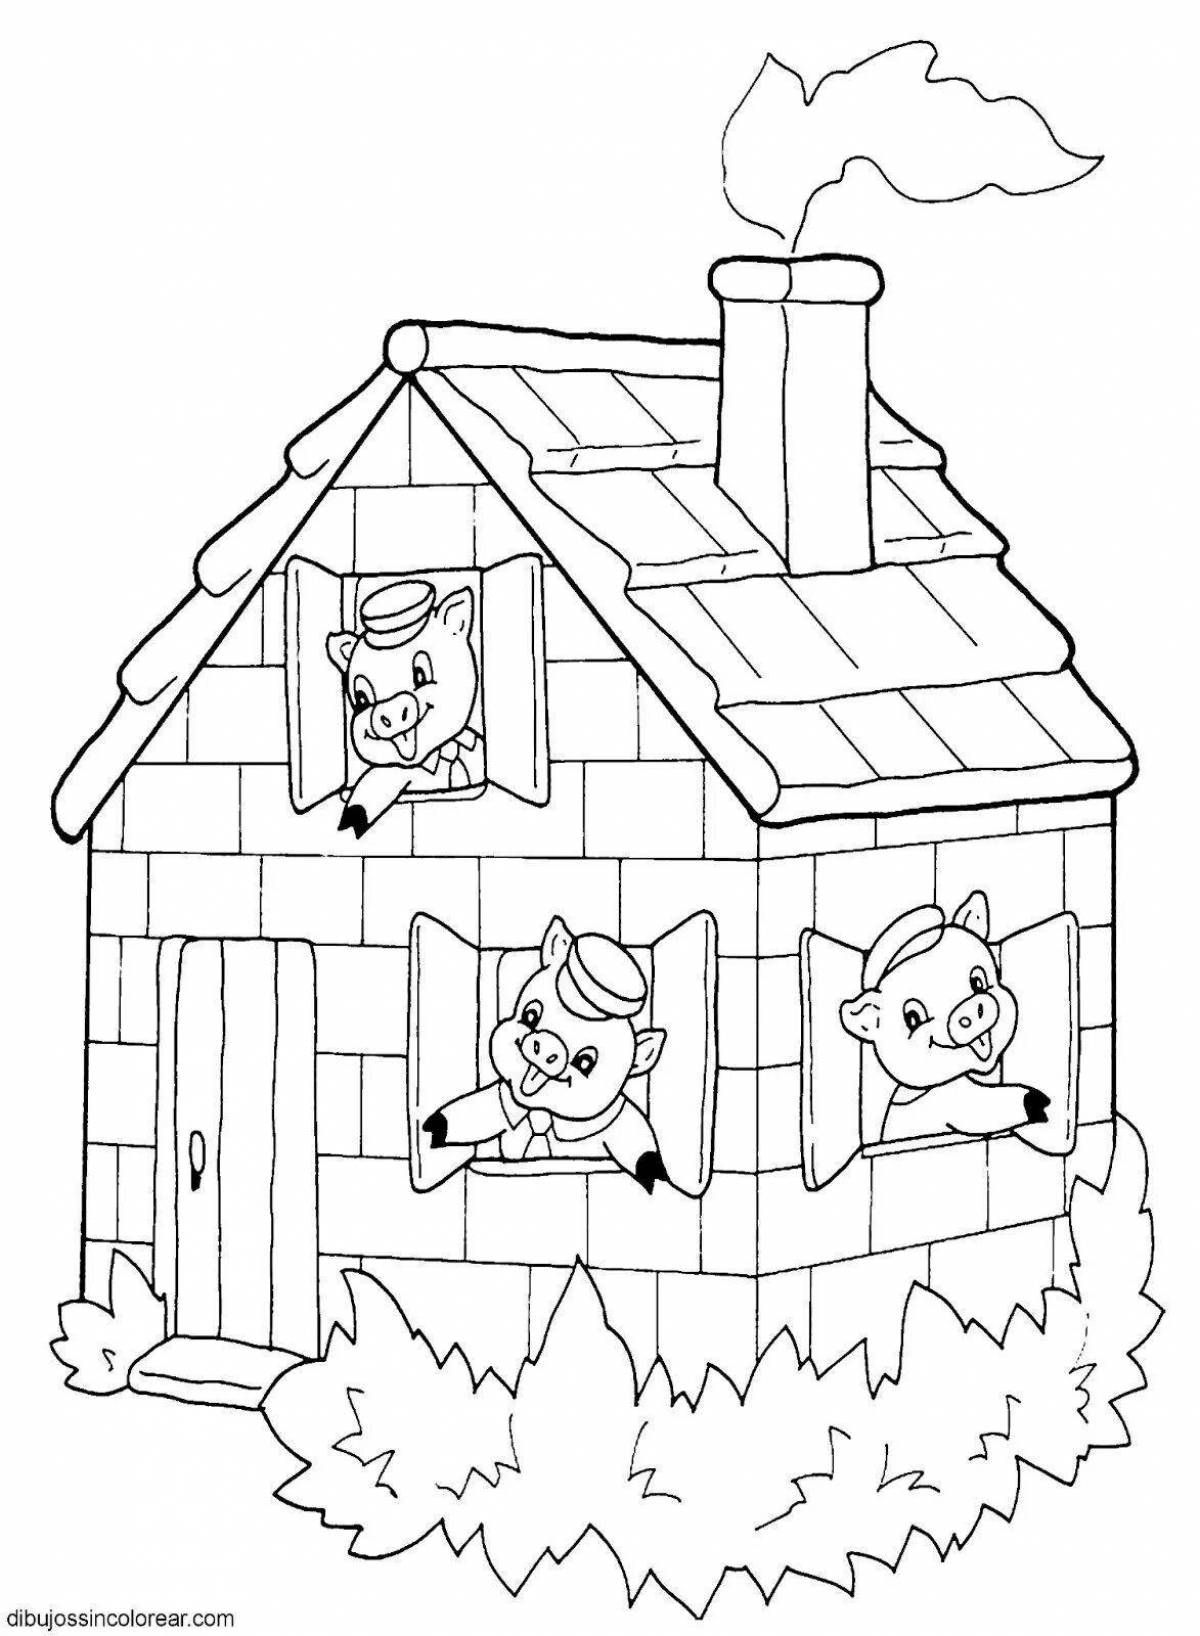 Outstanding preschool cat house coloring page